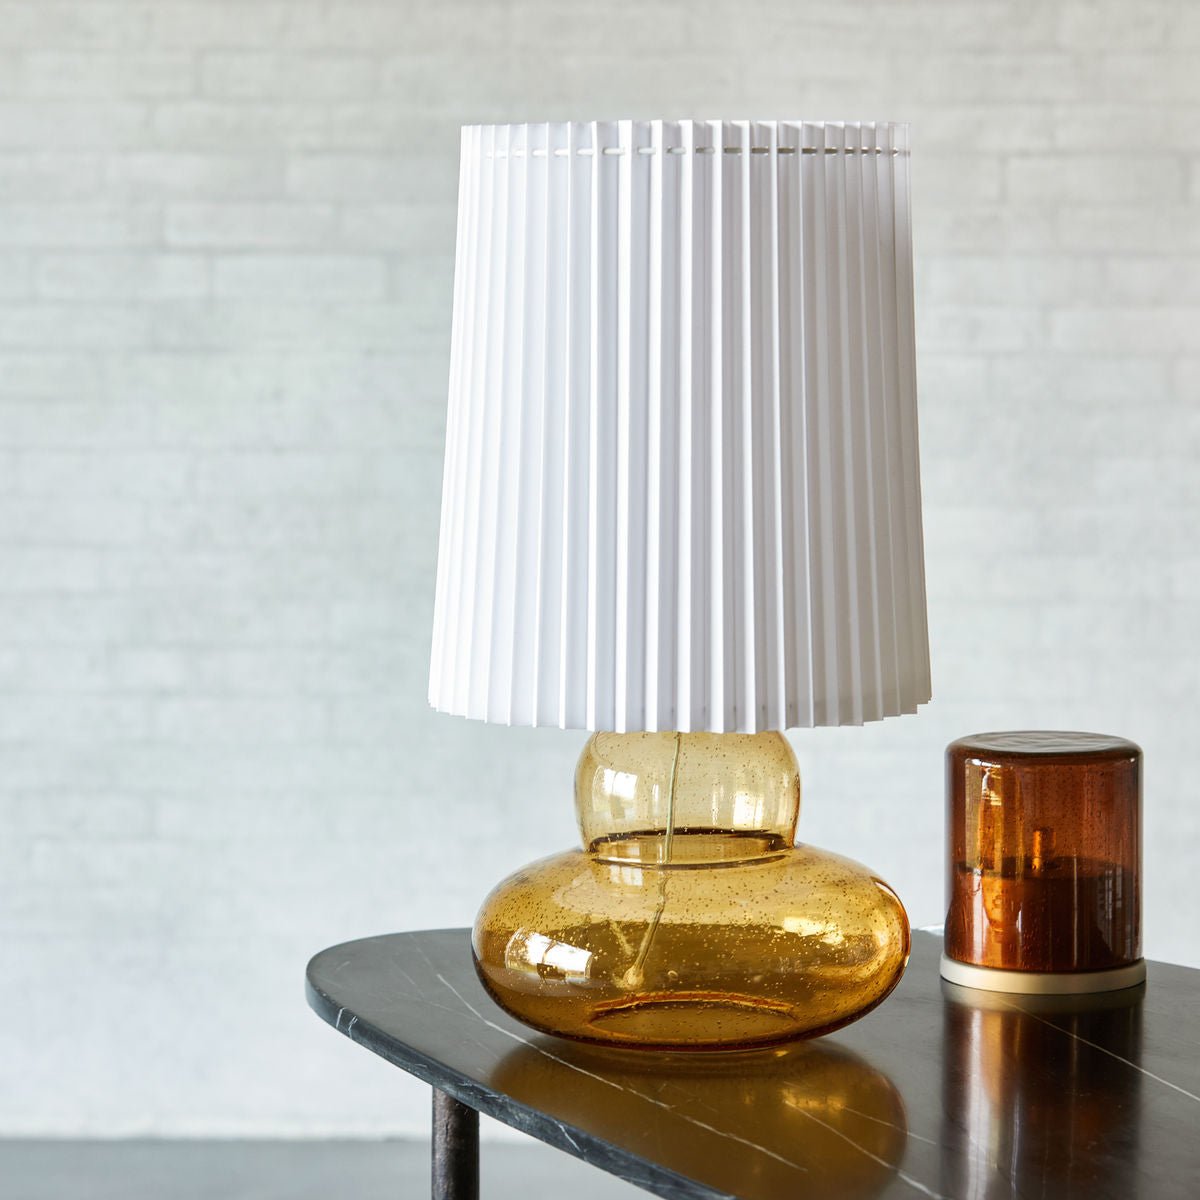 Table lamp incl. lampshade - Ribe - Amber table lamp by House Doctor